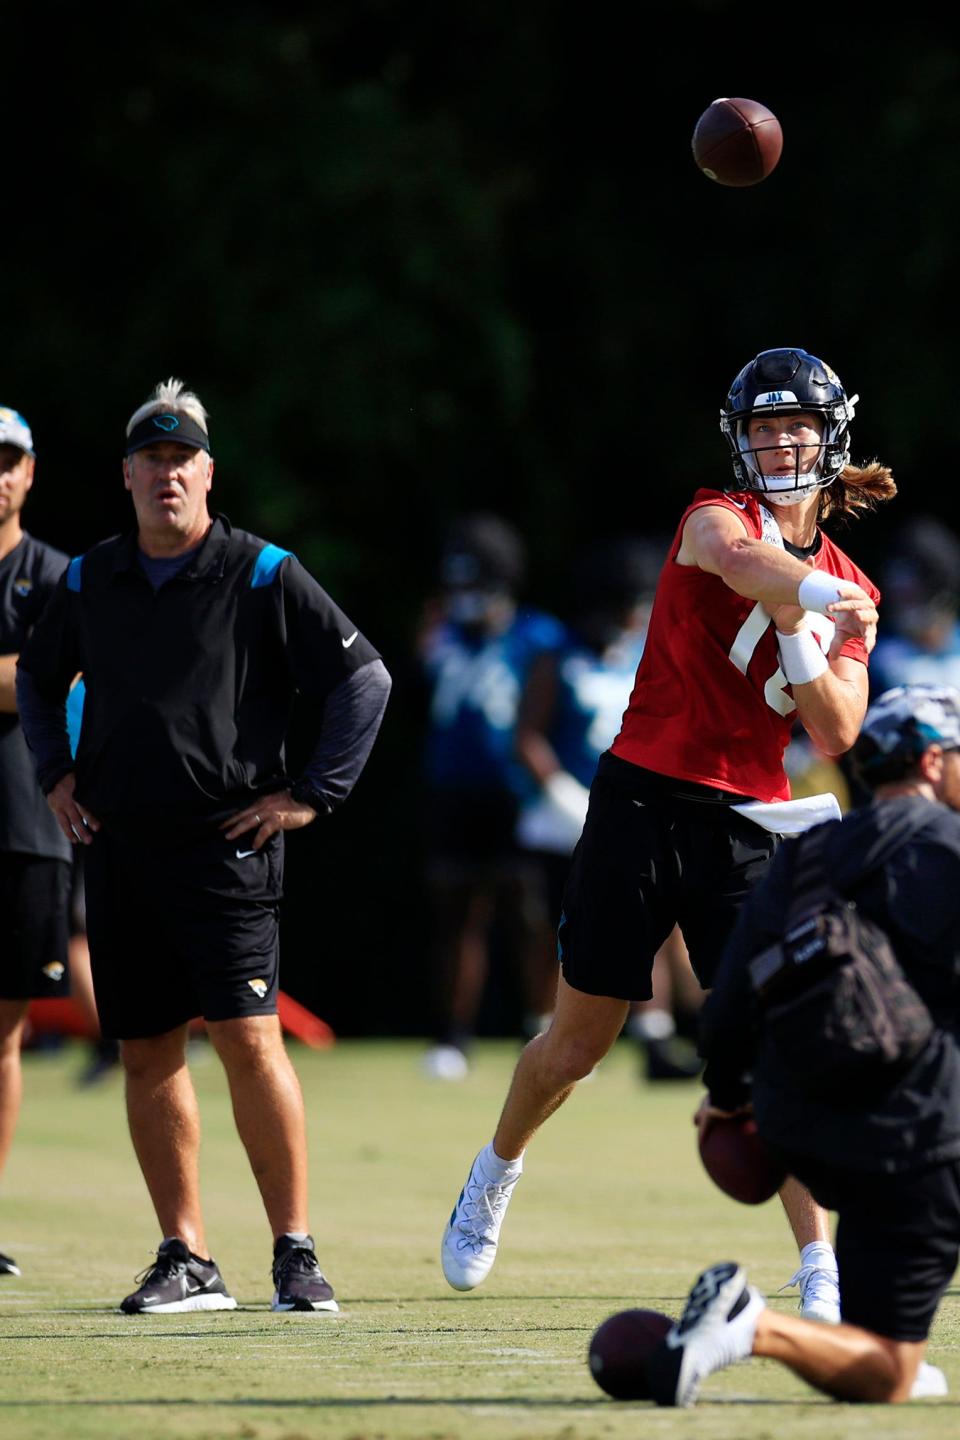 New head coach Doug Pederson looks on as Trevor Lawrence delivers a pass during preseason drills in Jacksonville.